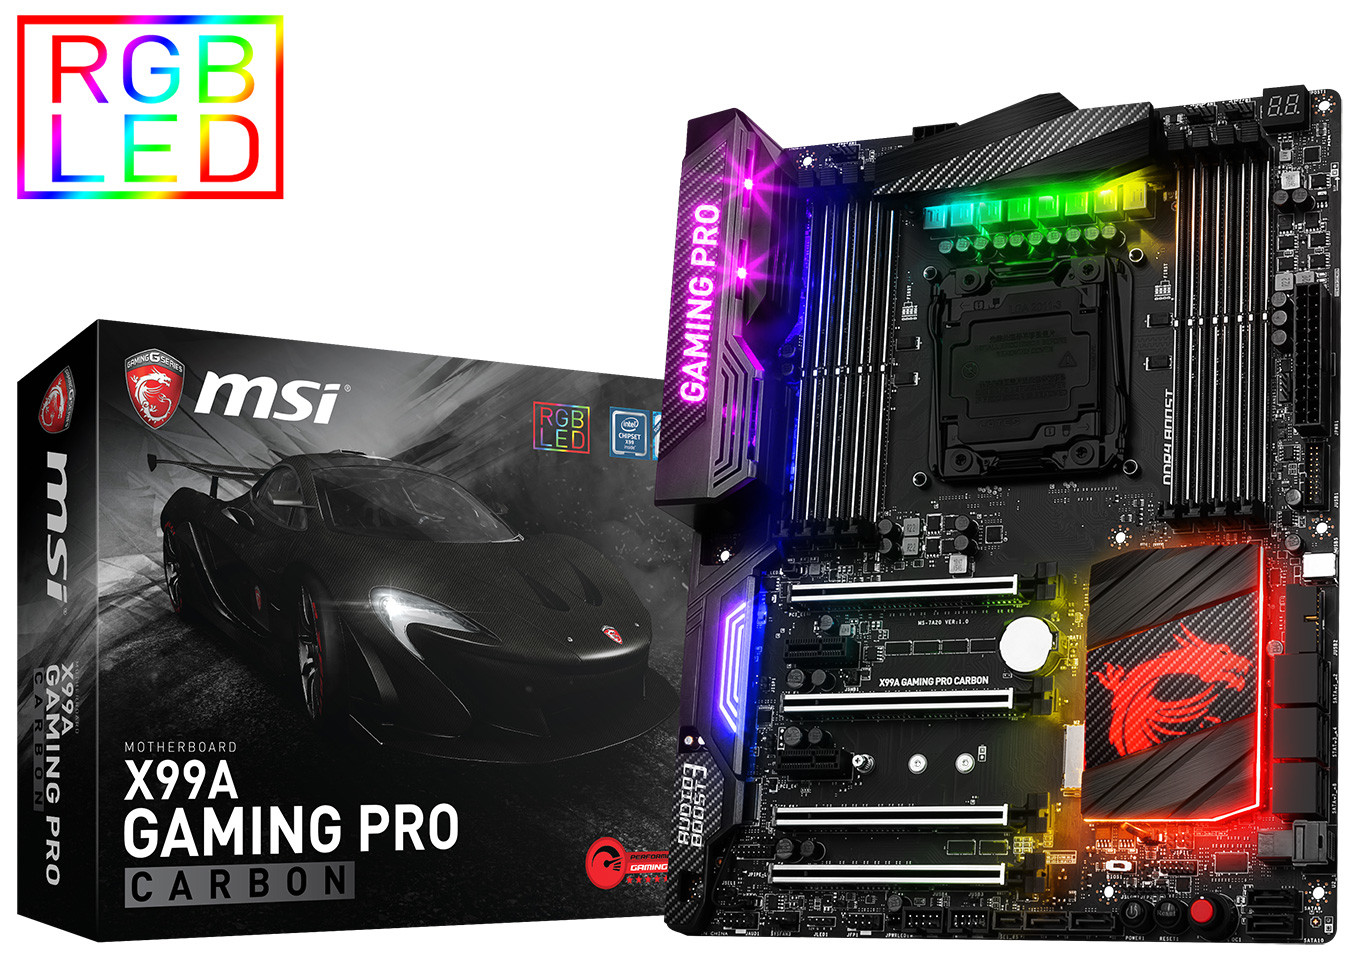 MSI X99A Gaming PRO Carbon 2